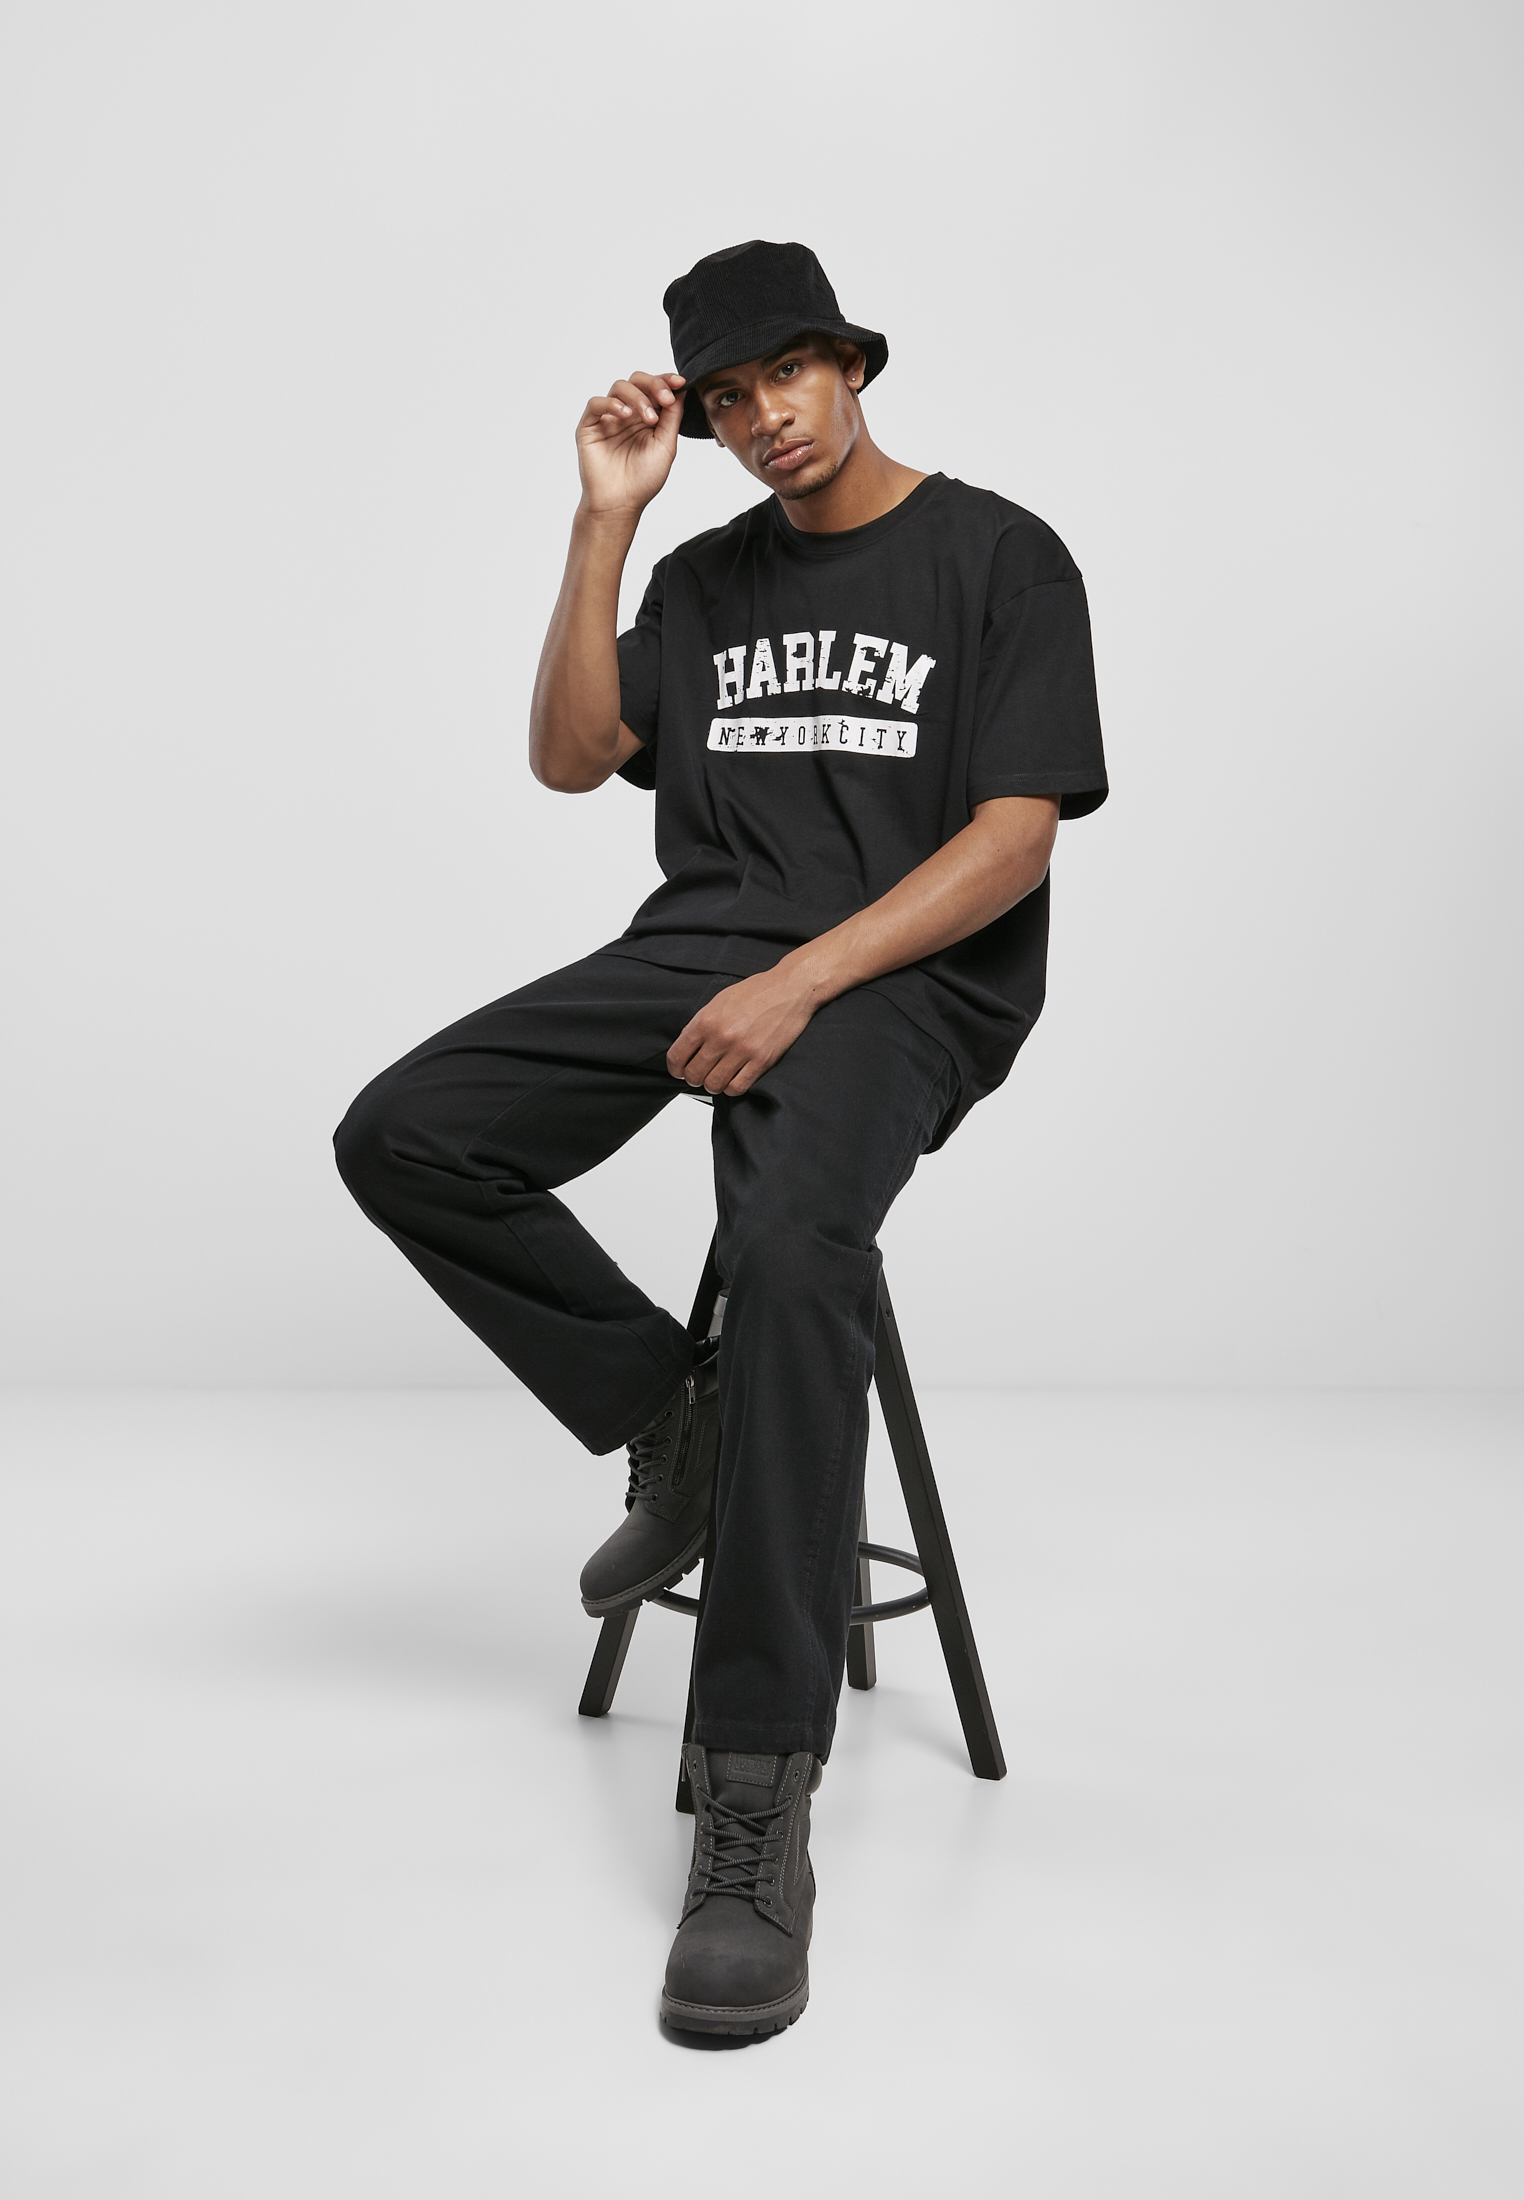 Saisonware Southpole Harlem Tee in Farbe black